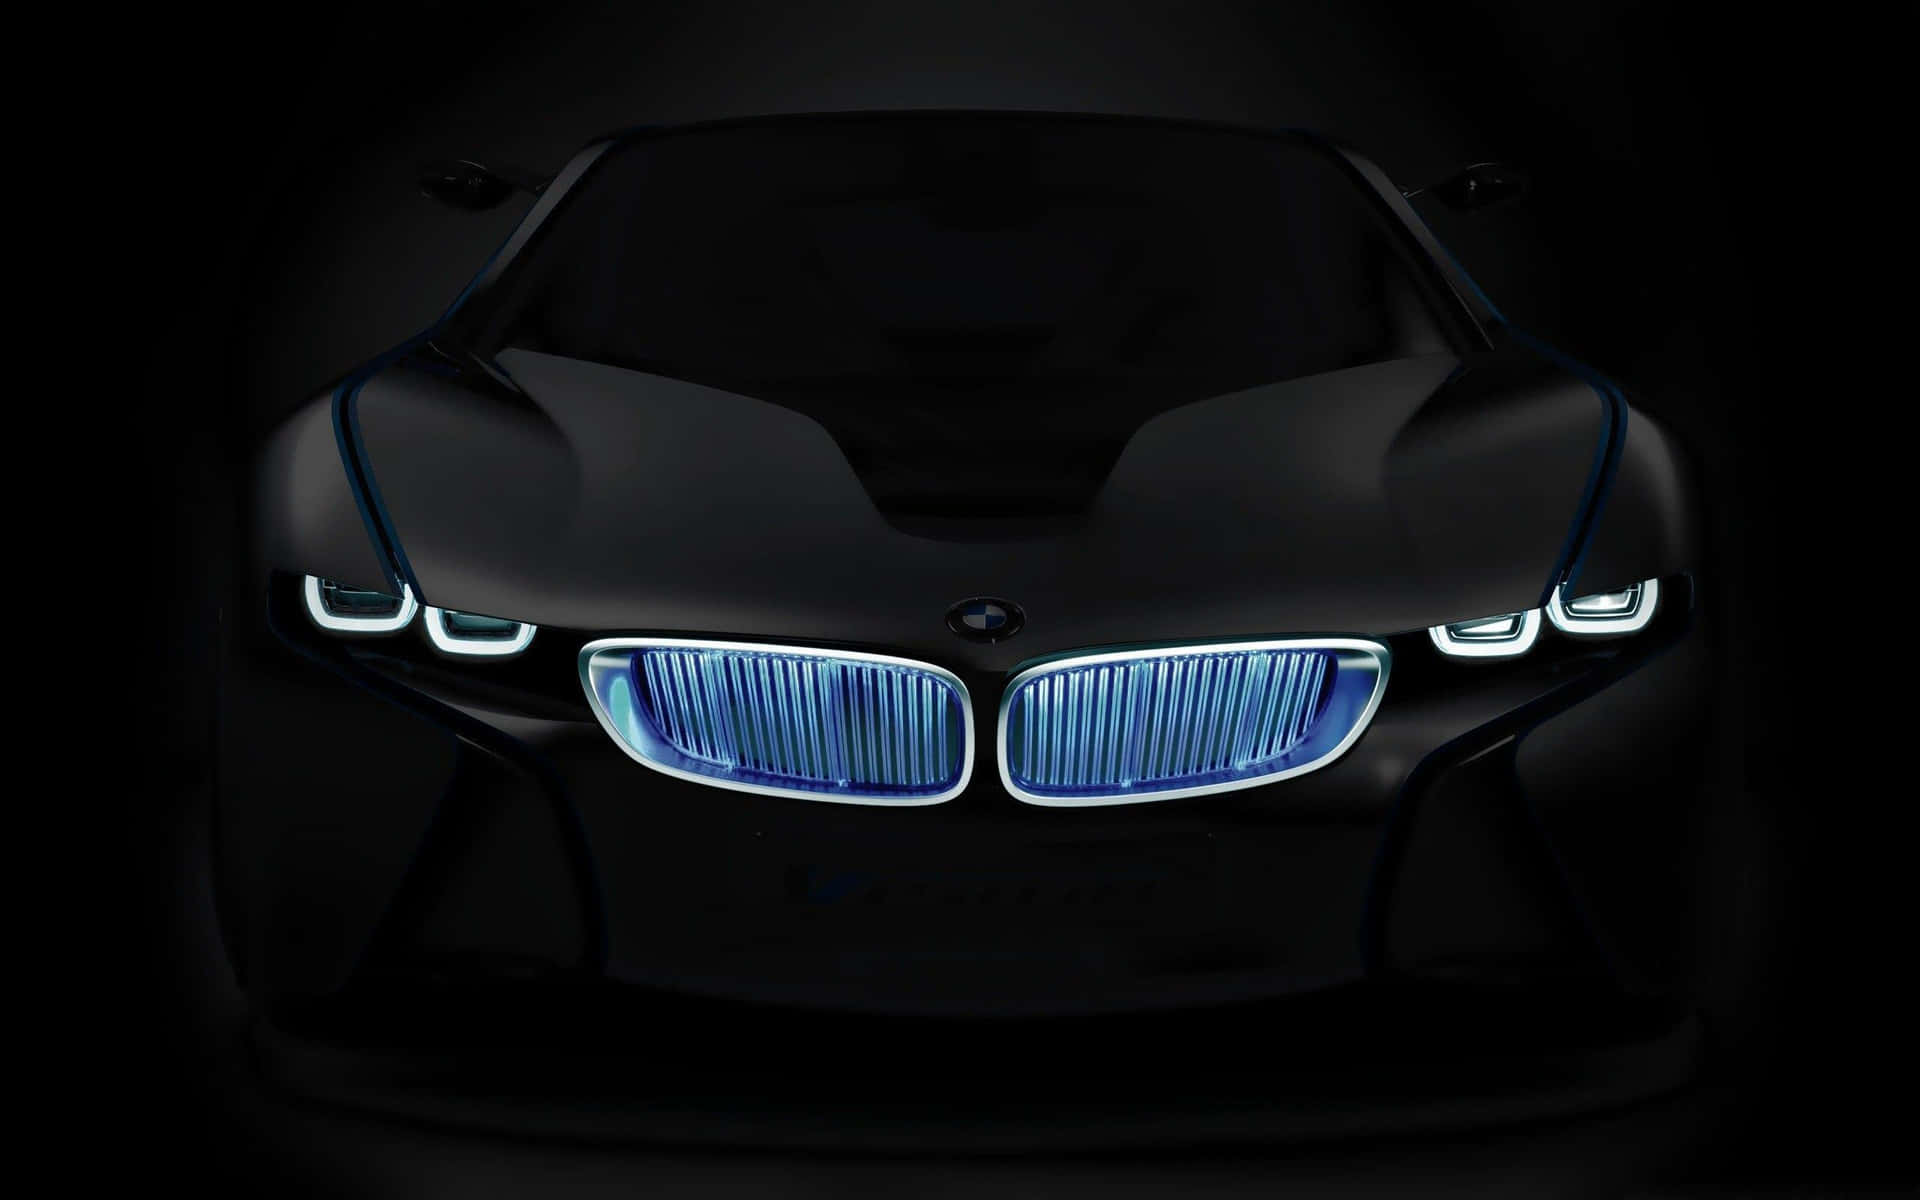 Bmw I8 Concept Car In Black And White Background